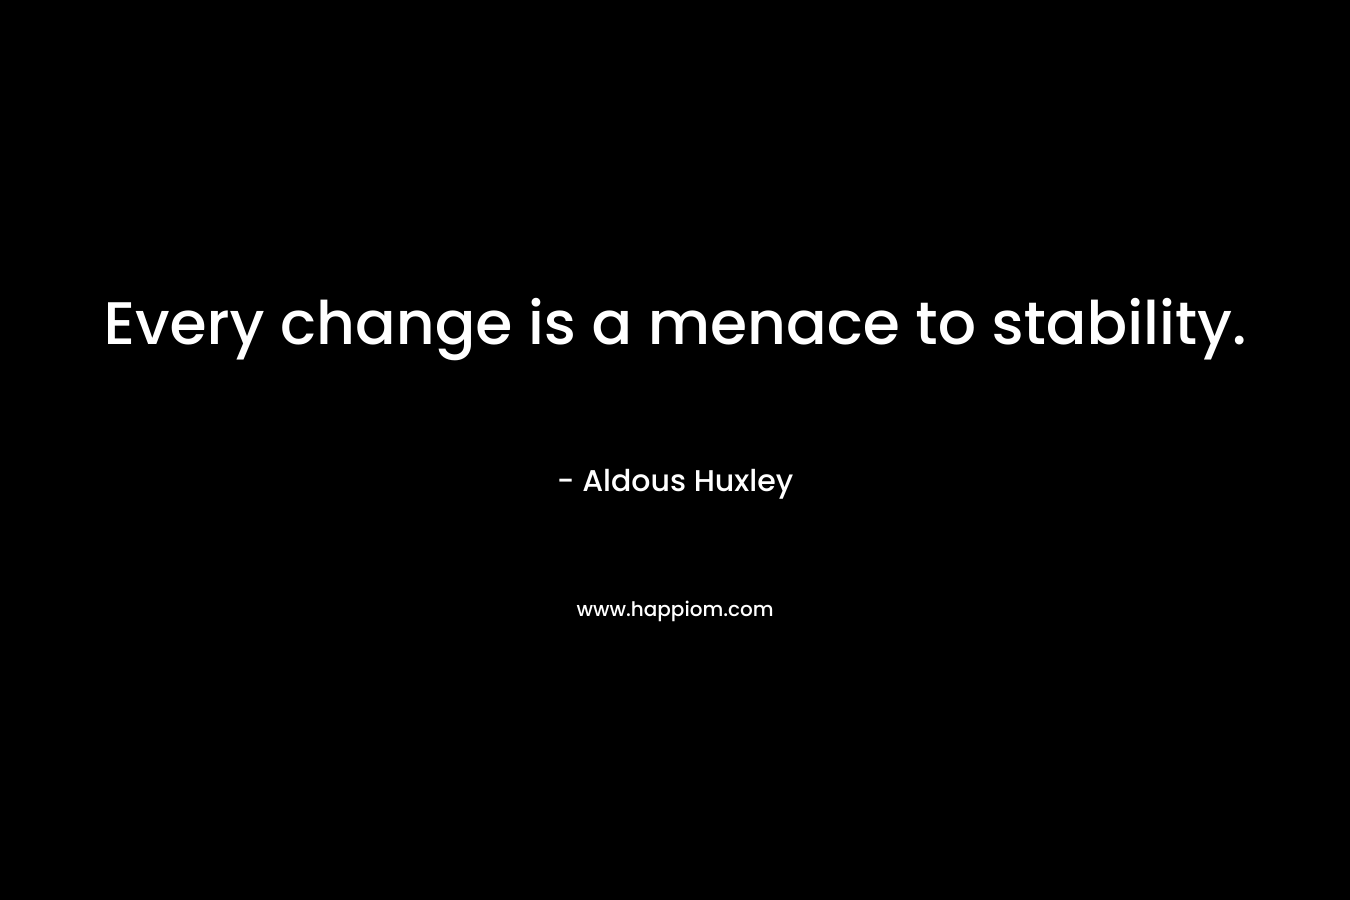 Every change is a menace to stability. – Aldous Huxley